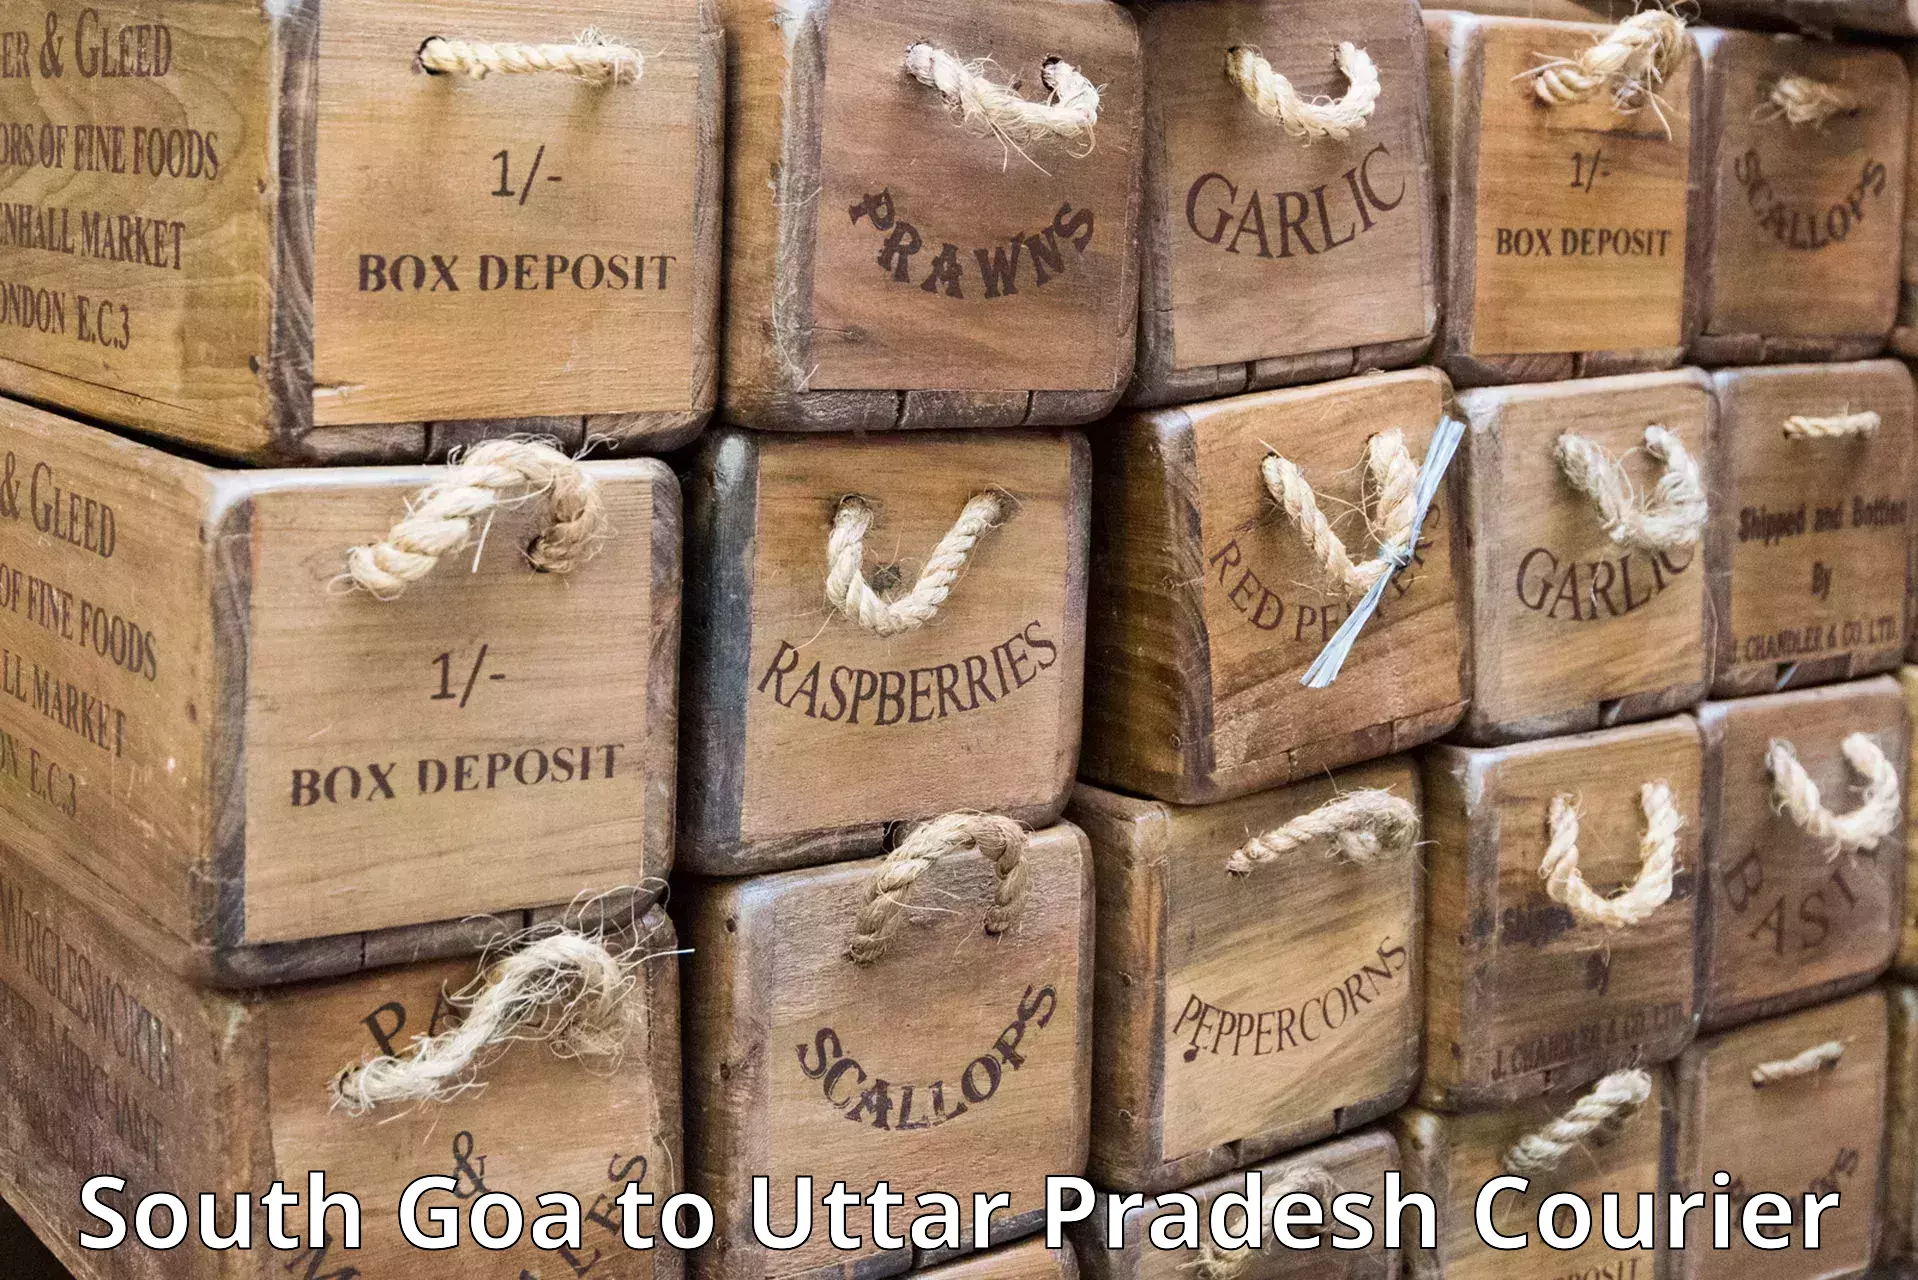 Express mail service South Goa to Saharanpur